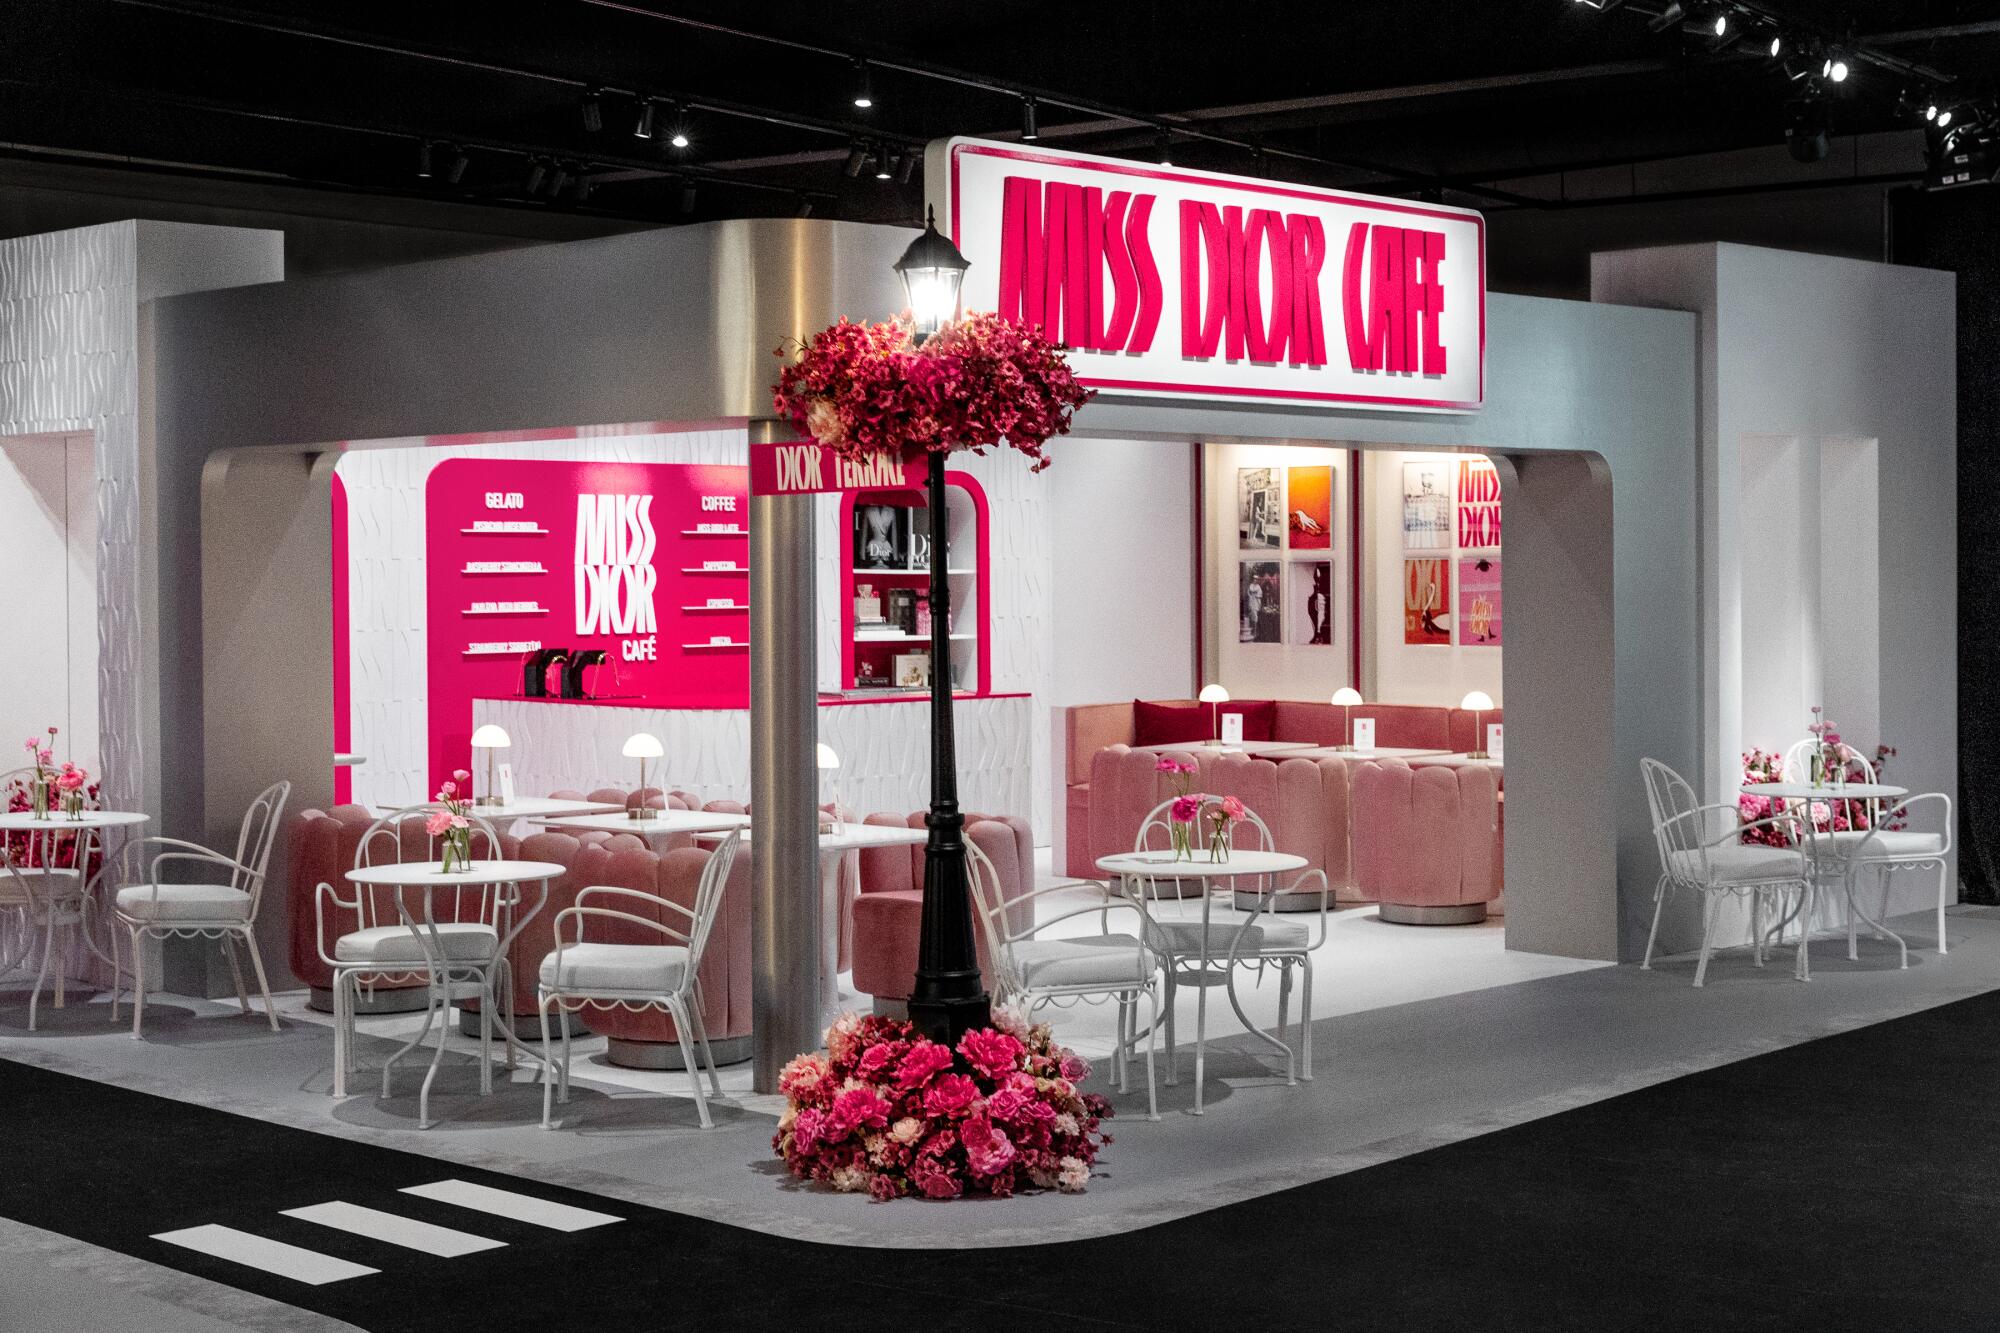 Miss Dior Avenue pop-up comes to West Hollywood